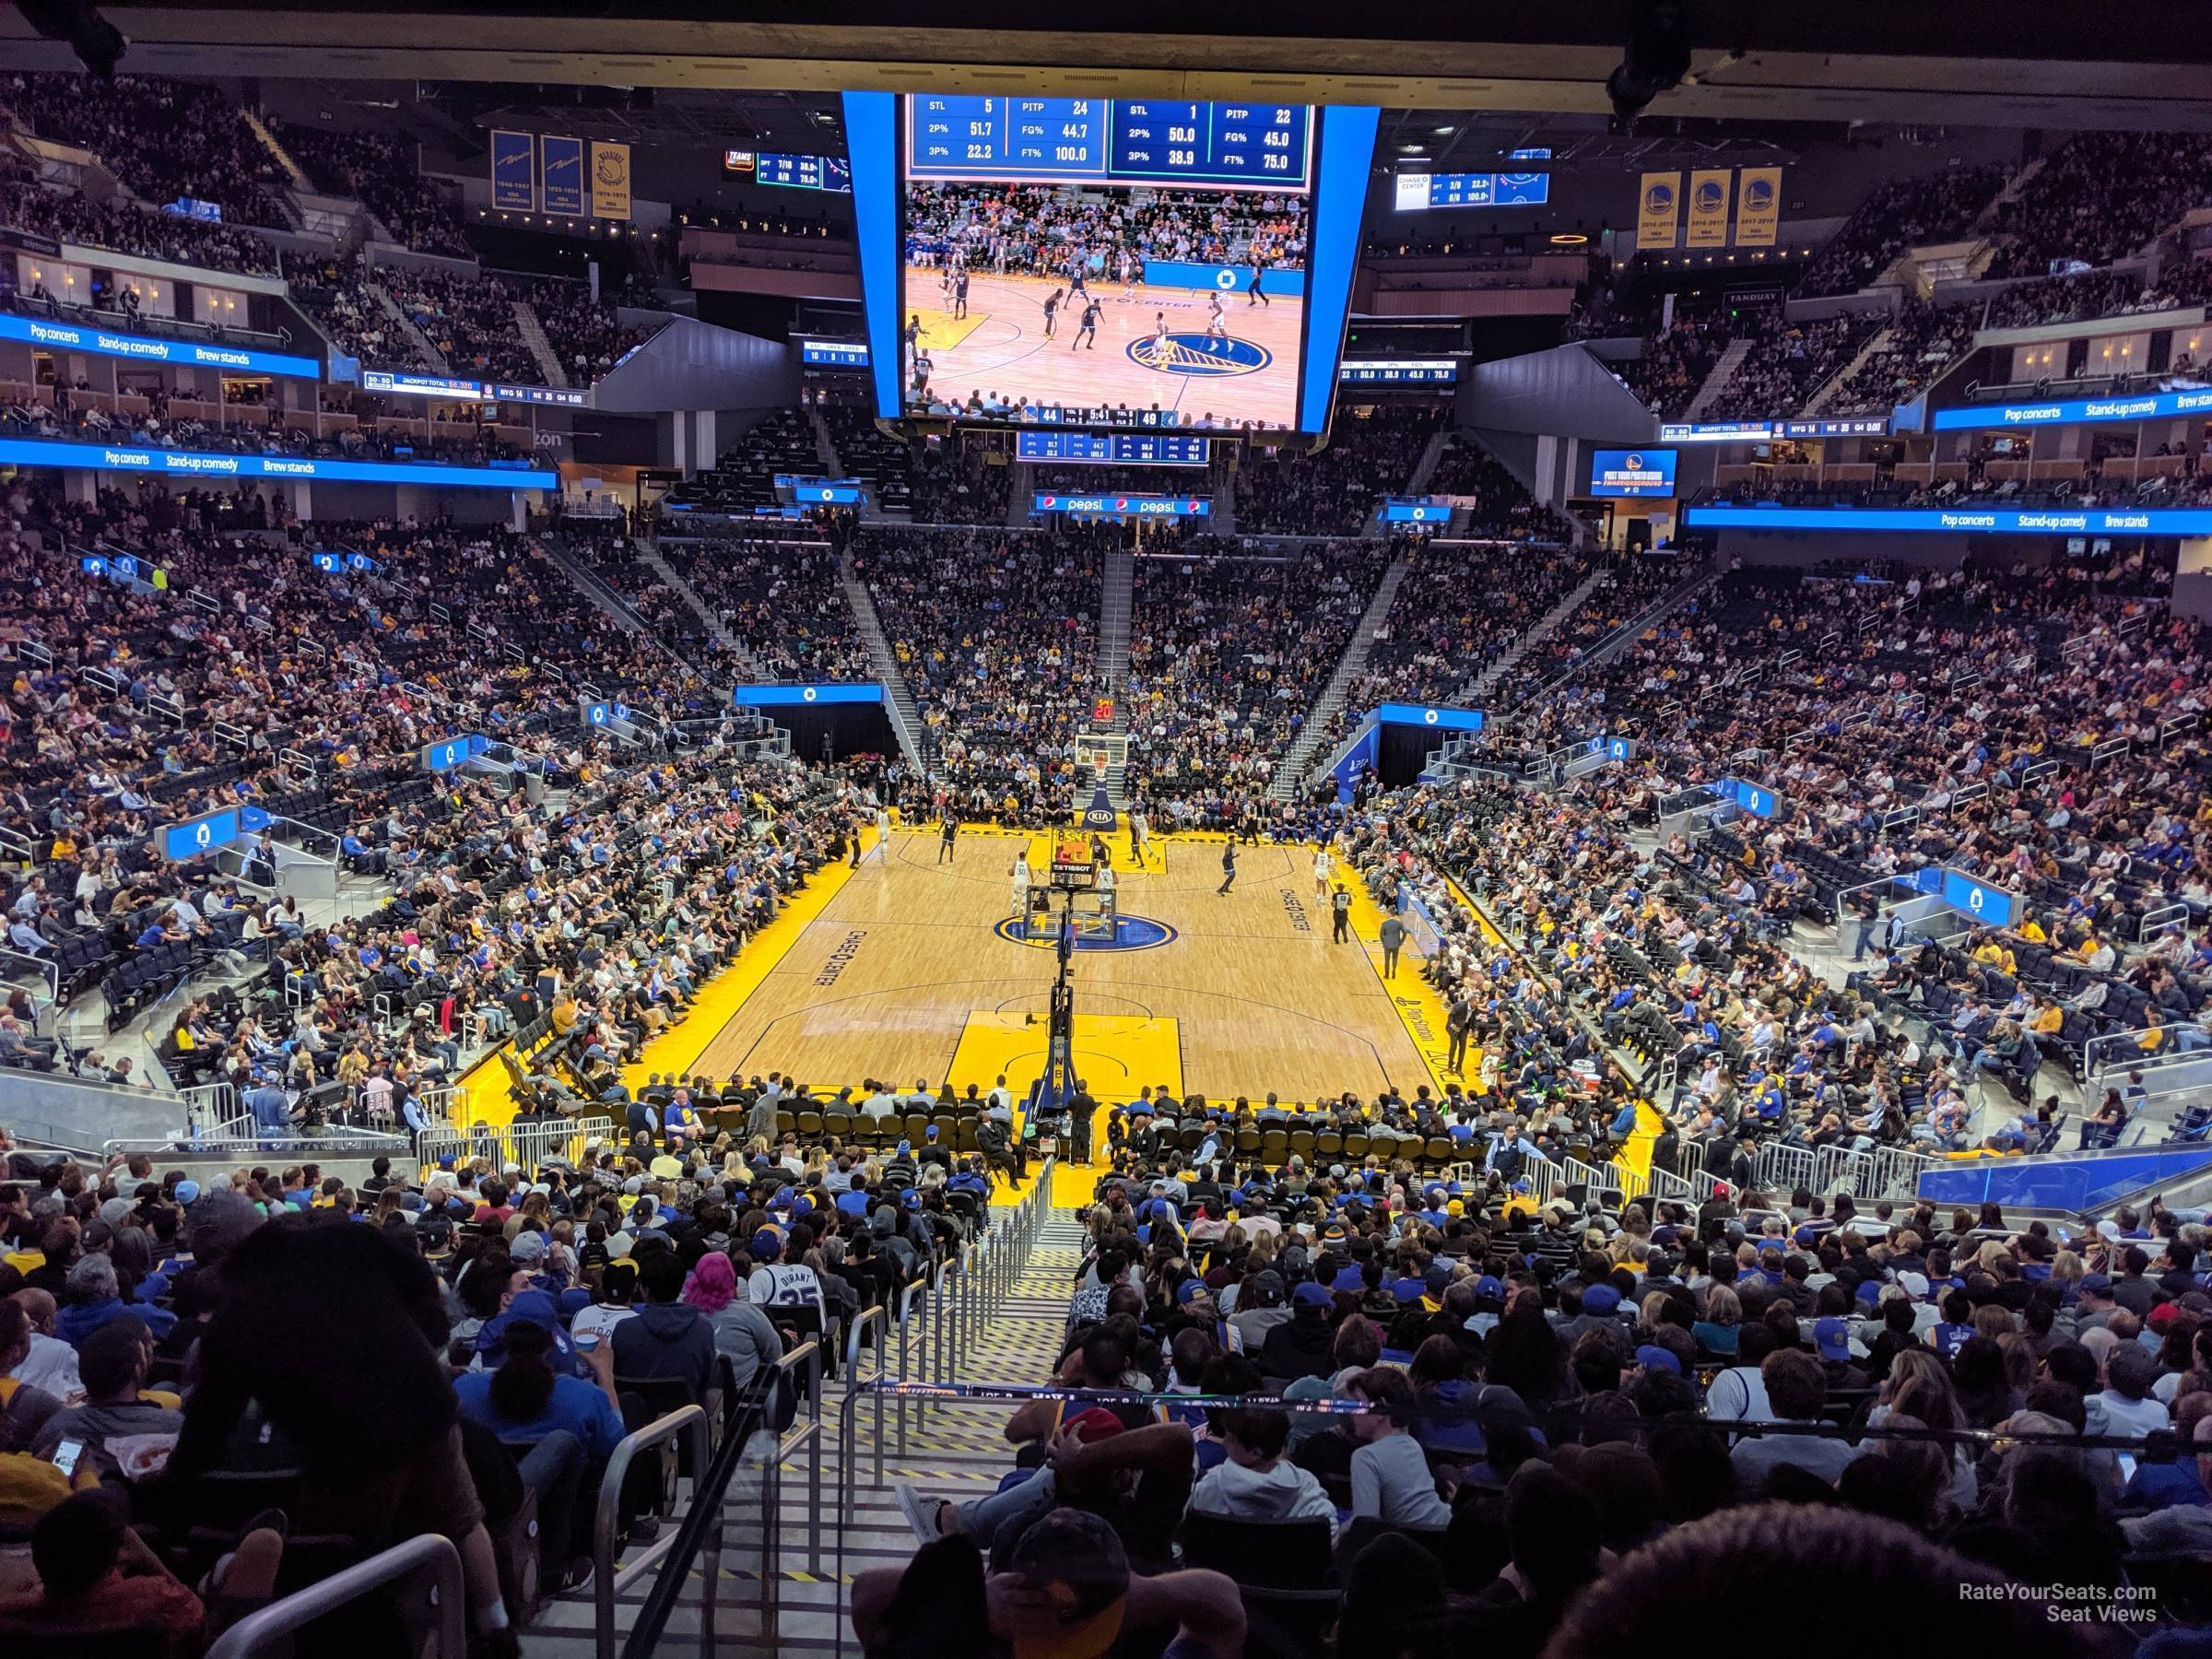 section 109, row 27 seat view  for basketball - chase center